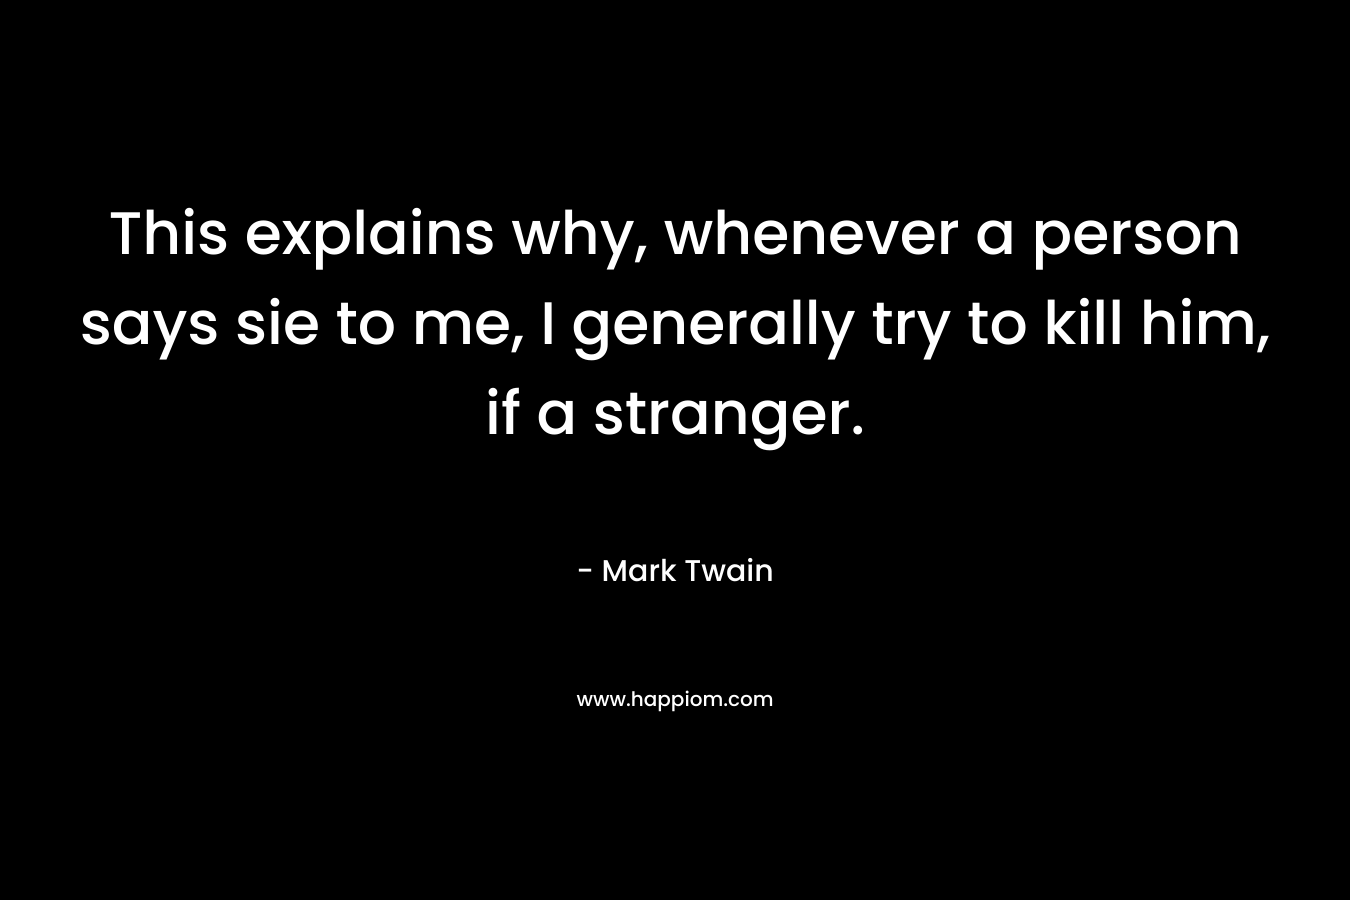 This explains why, whenever a person says sie to me, I generally try to kill him, if a stranger. – Mark Twain